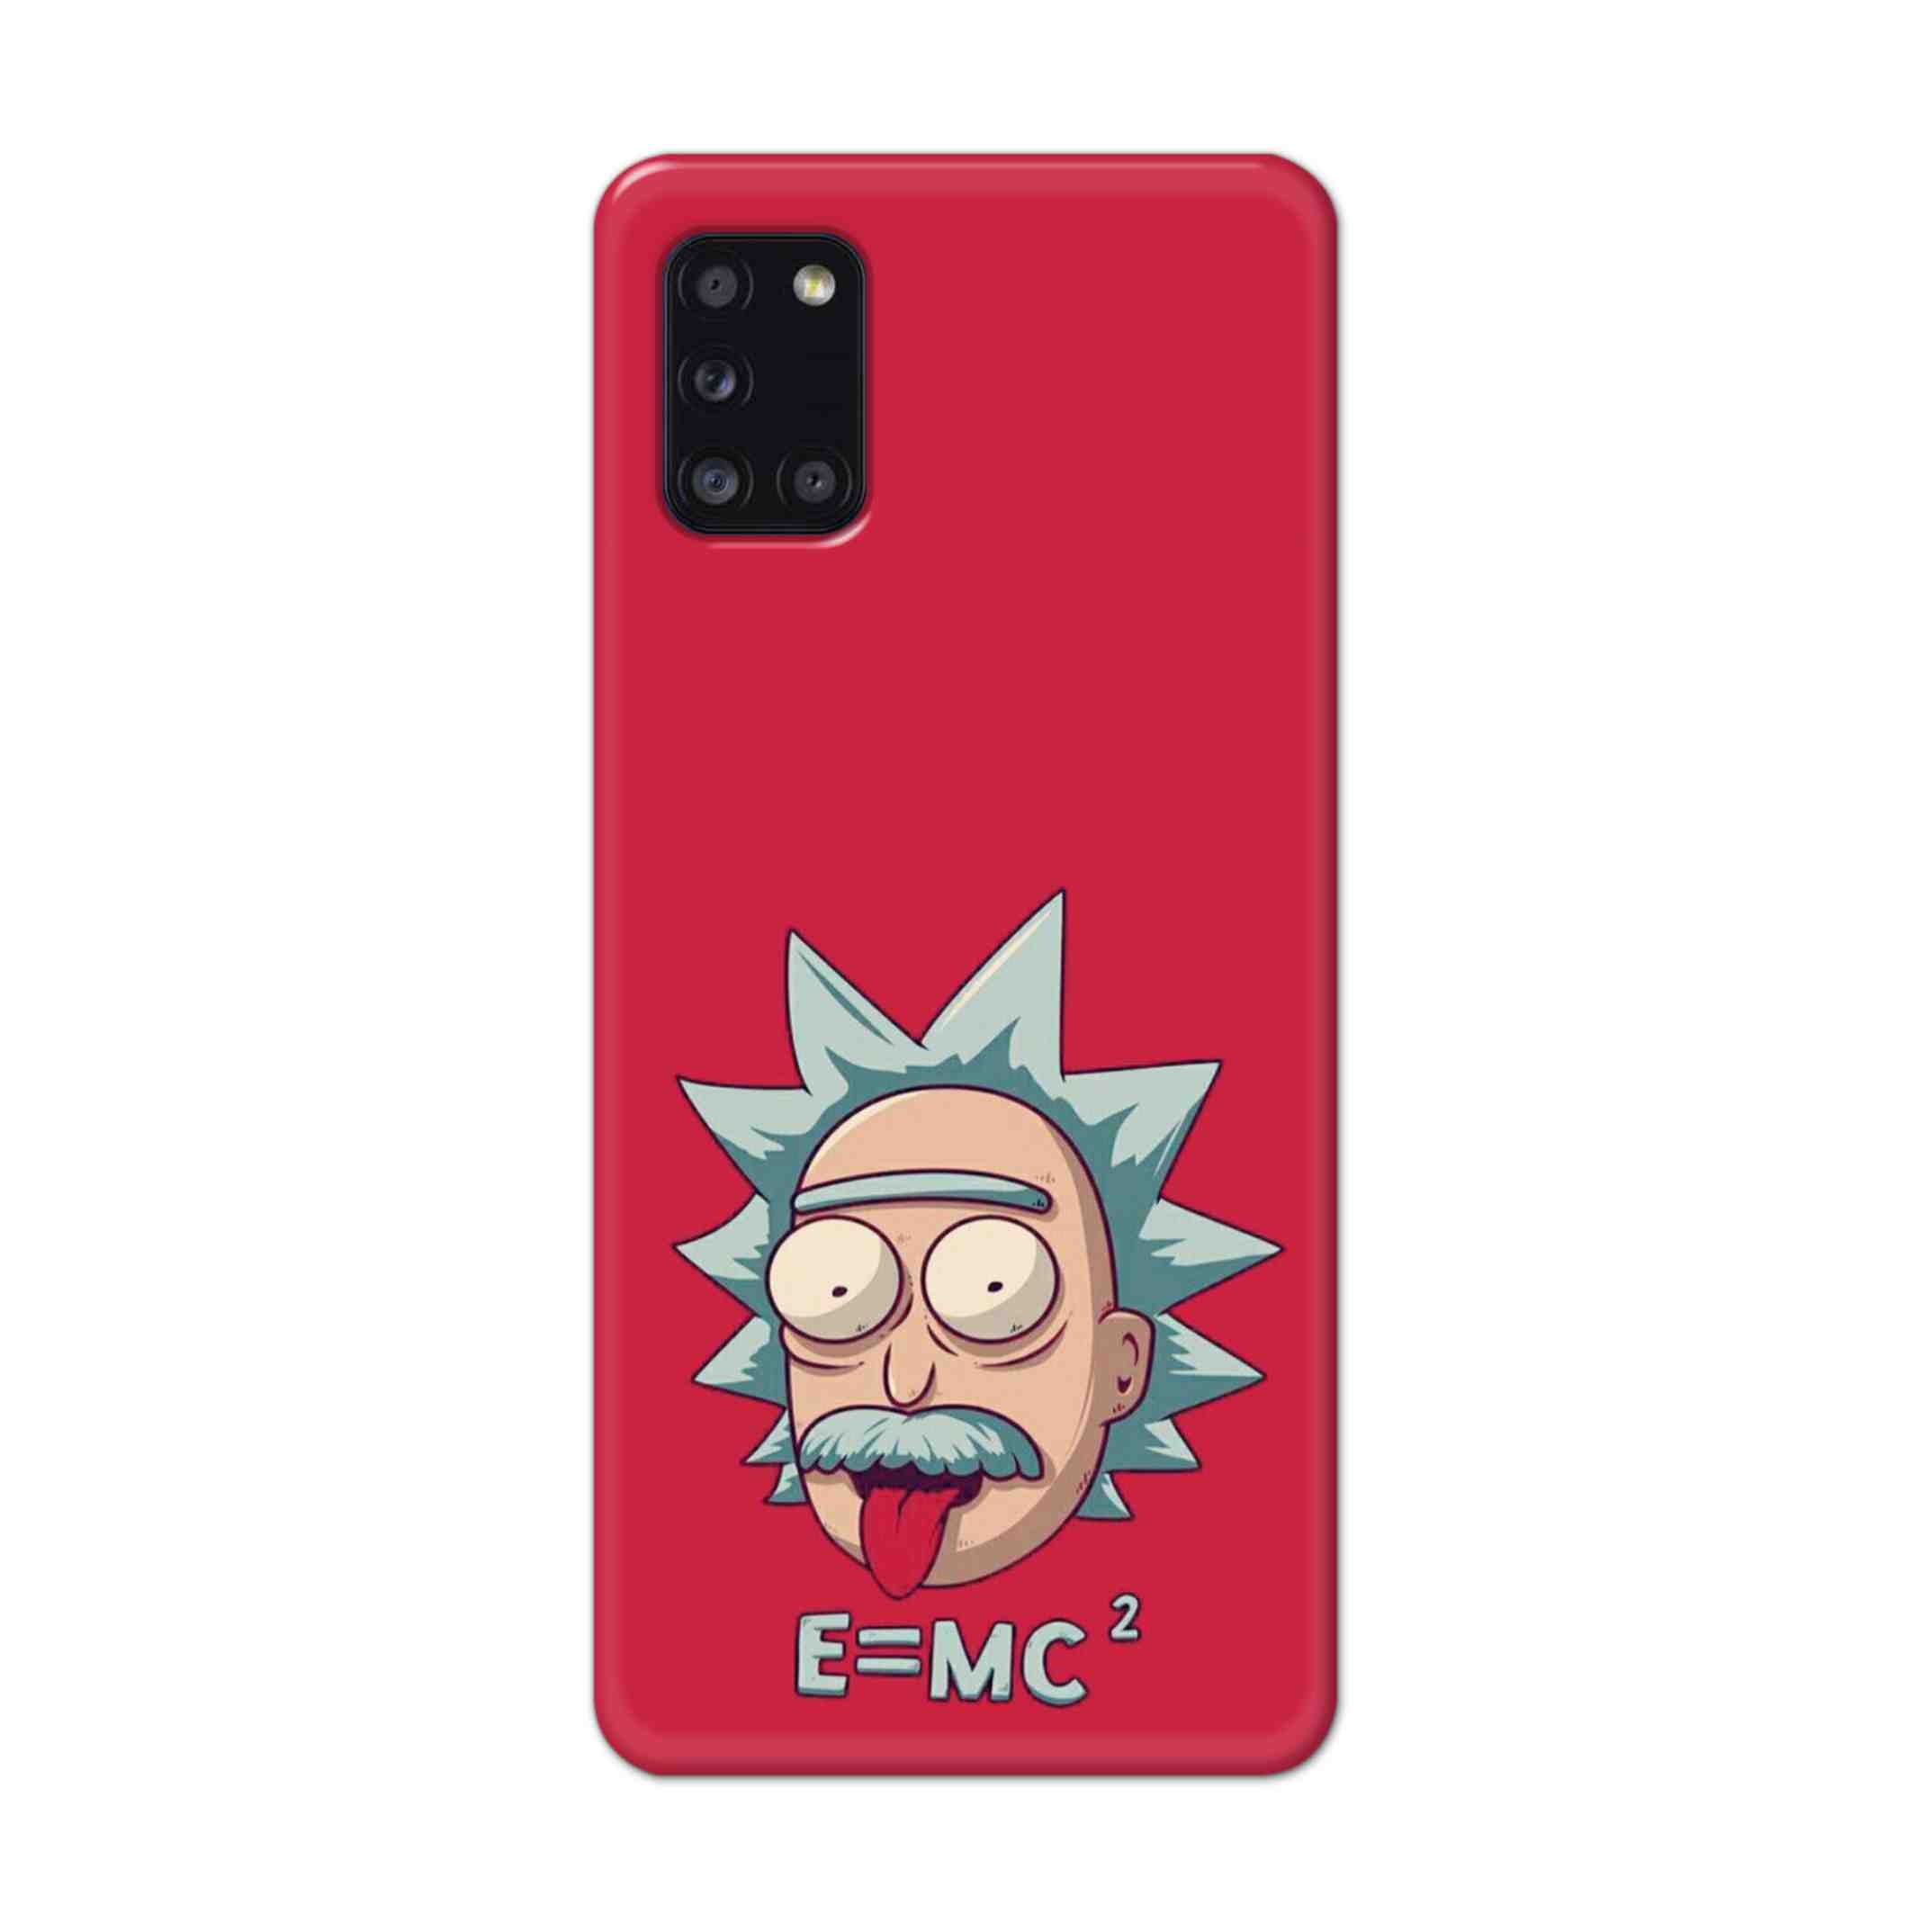 Buy E=Mc Hard Back Mobile Phone Case Cover For Samsung Galaxy A31 Online